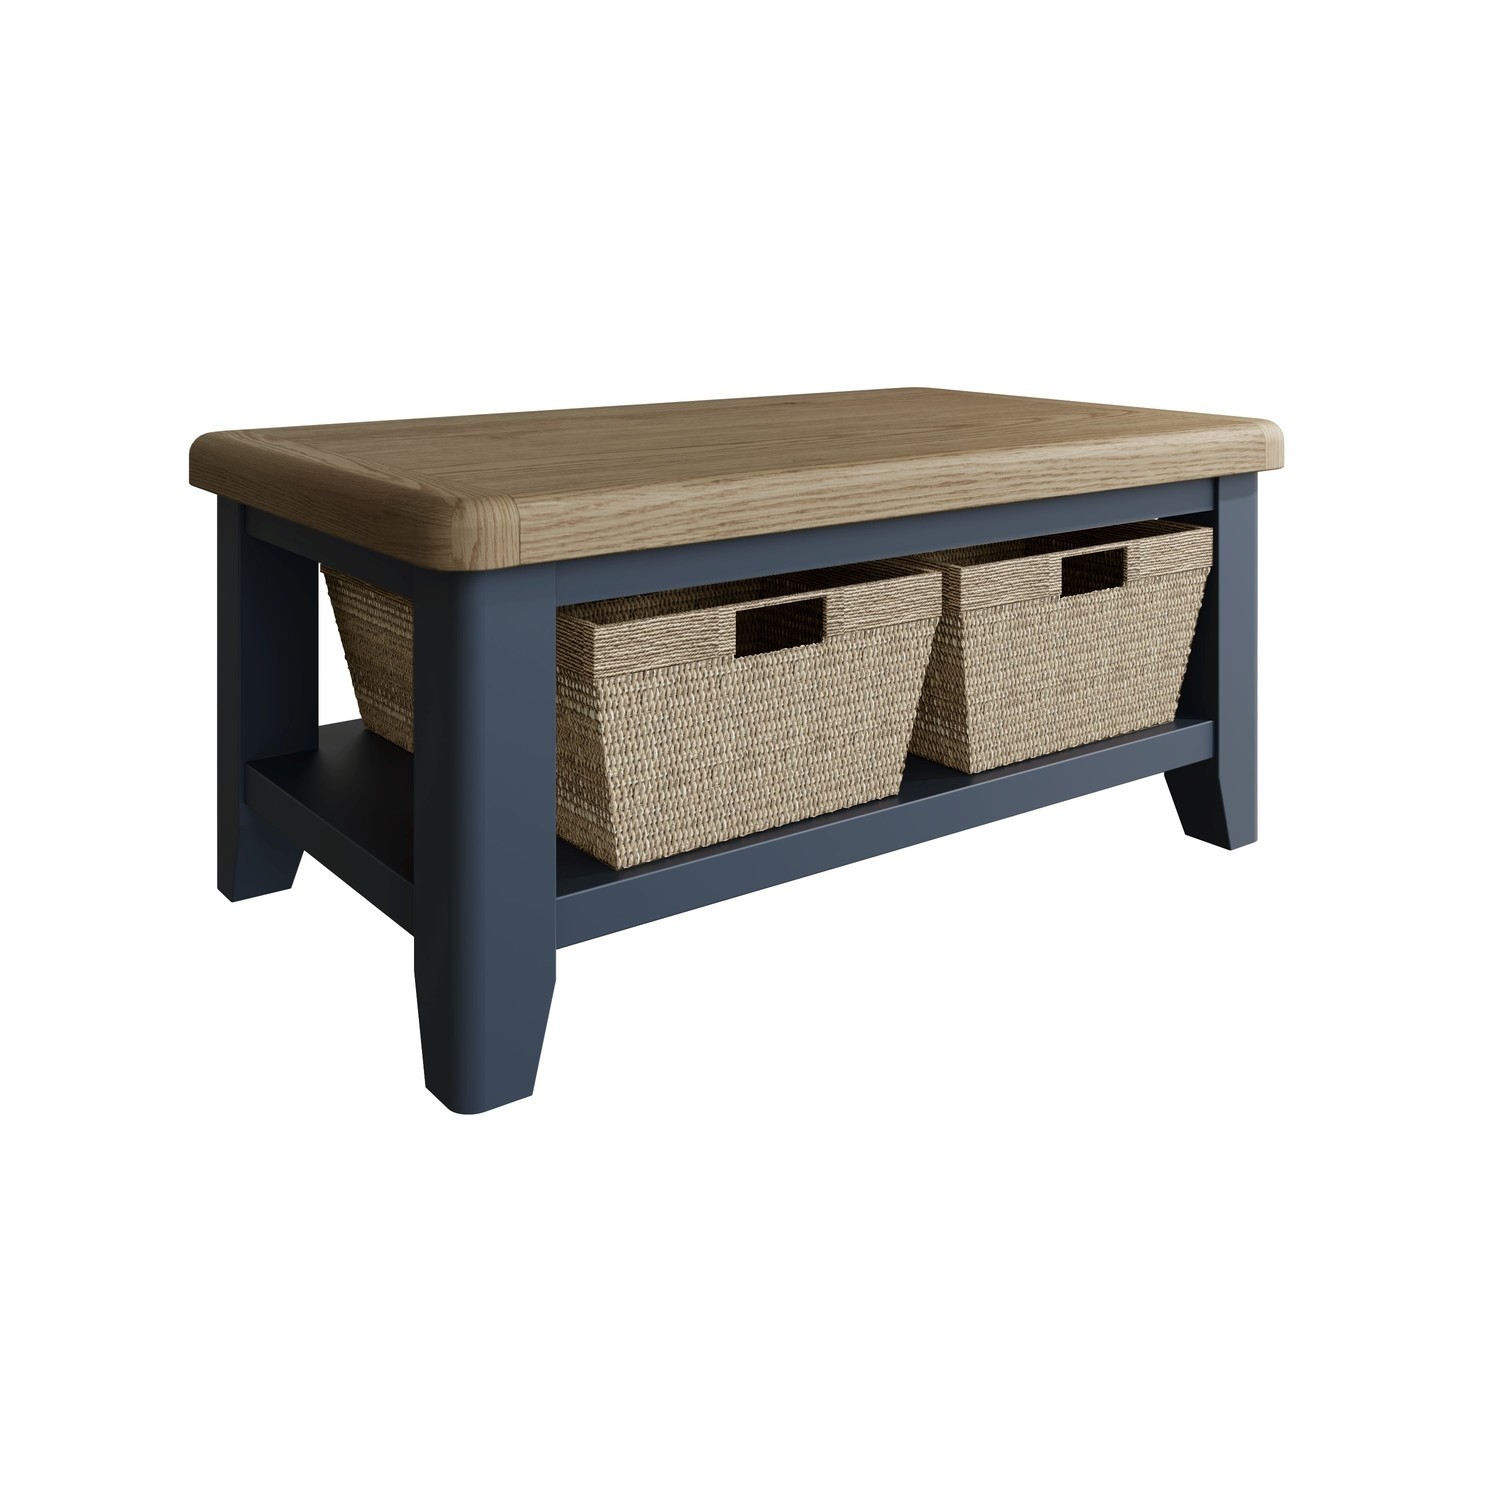 Read more about Oak & blue coffee table 100cm with wicker baskets